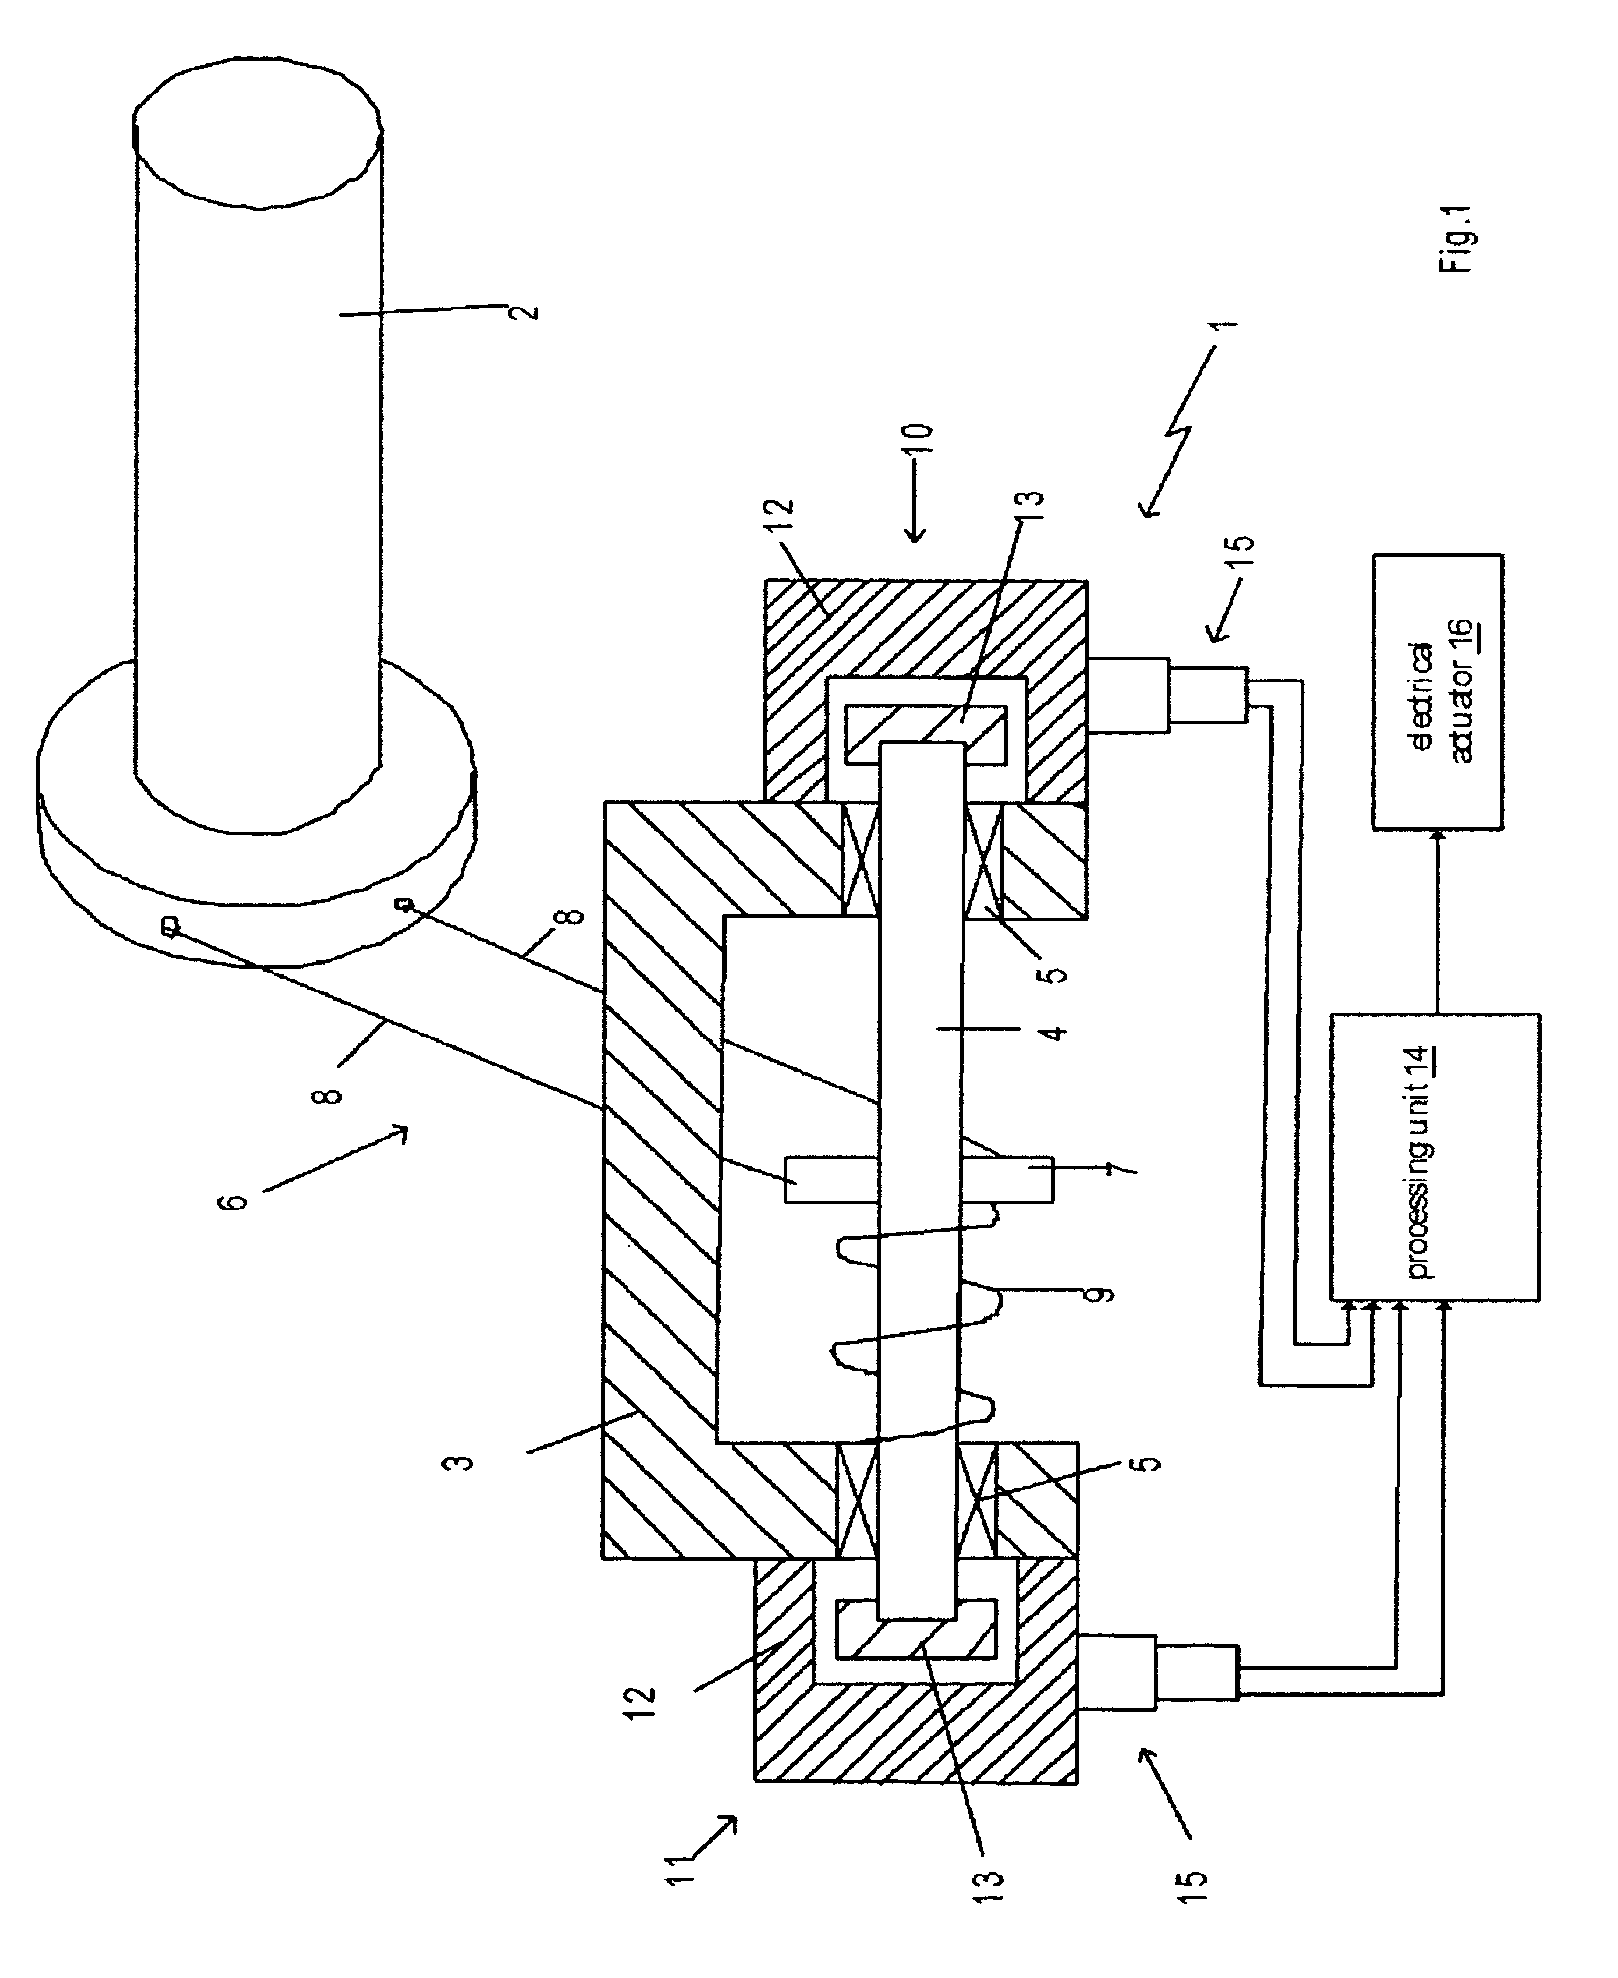 Acquisition system for detecting the angular position of a gas twist grip in a motorcycle